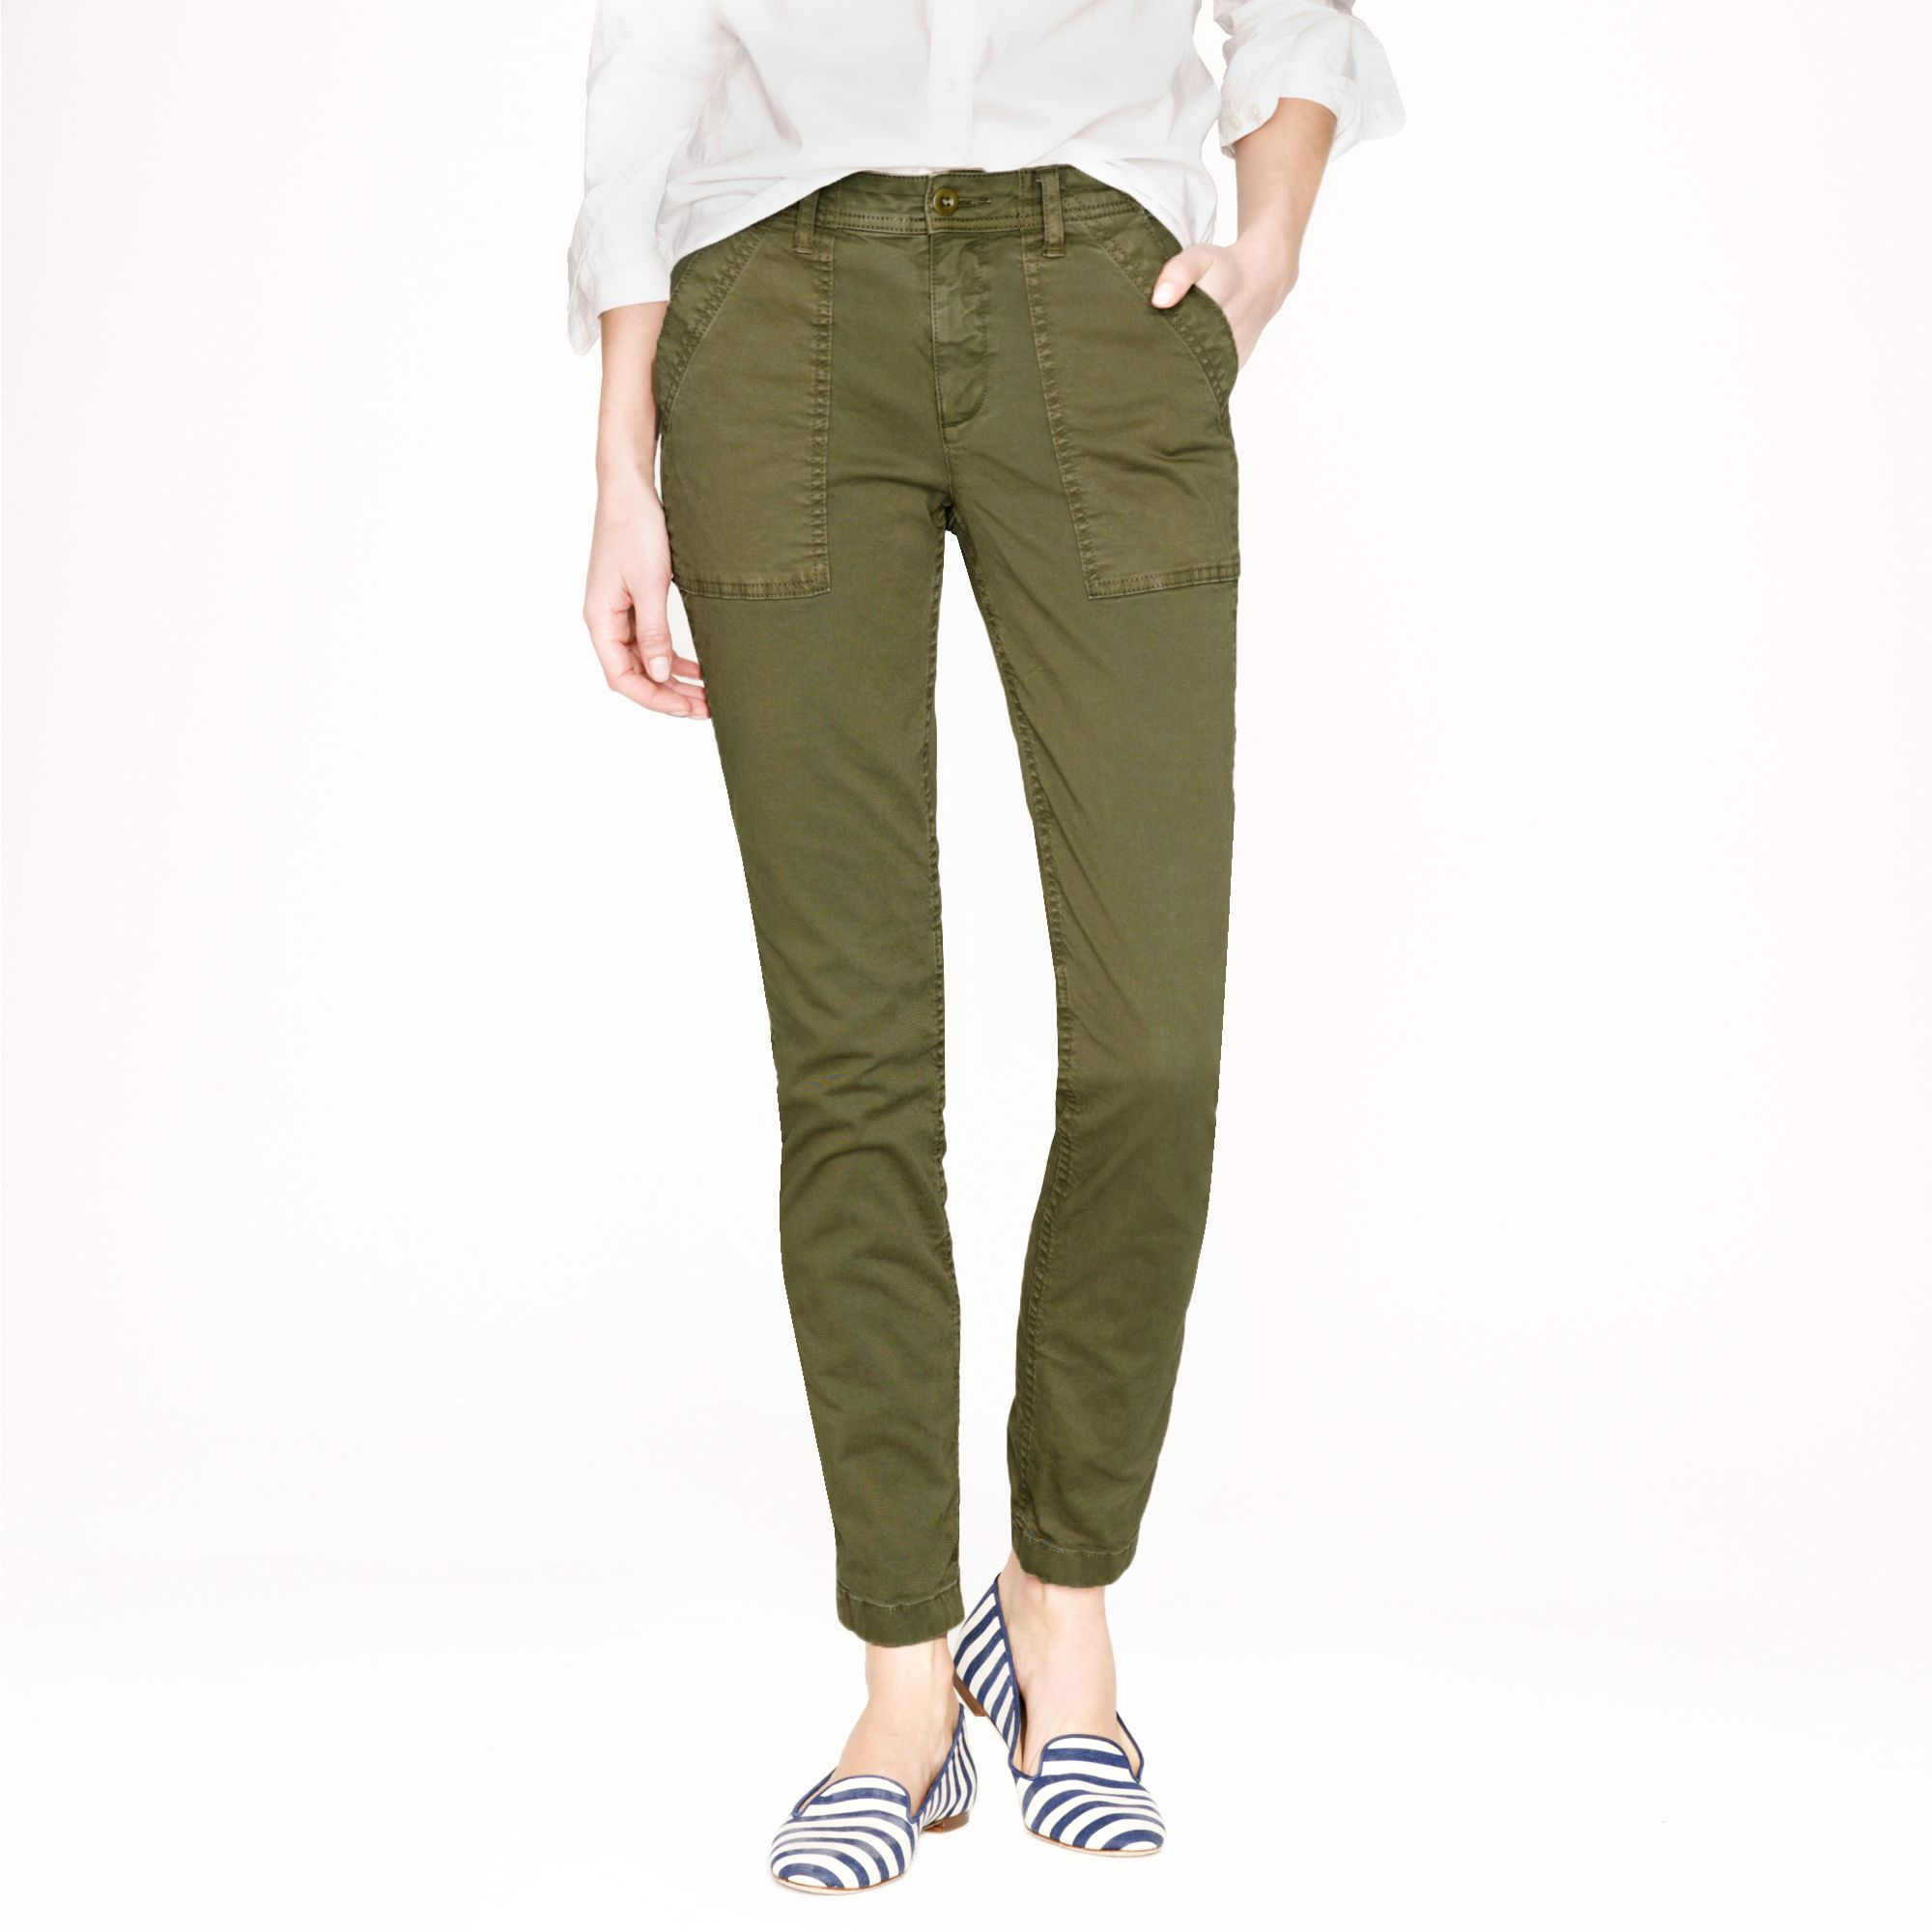 Lyst - J.Crew Skinny Washed Twill Utility Pant in Green